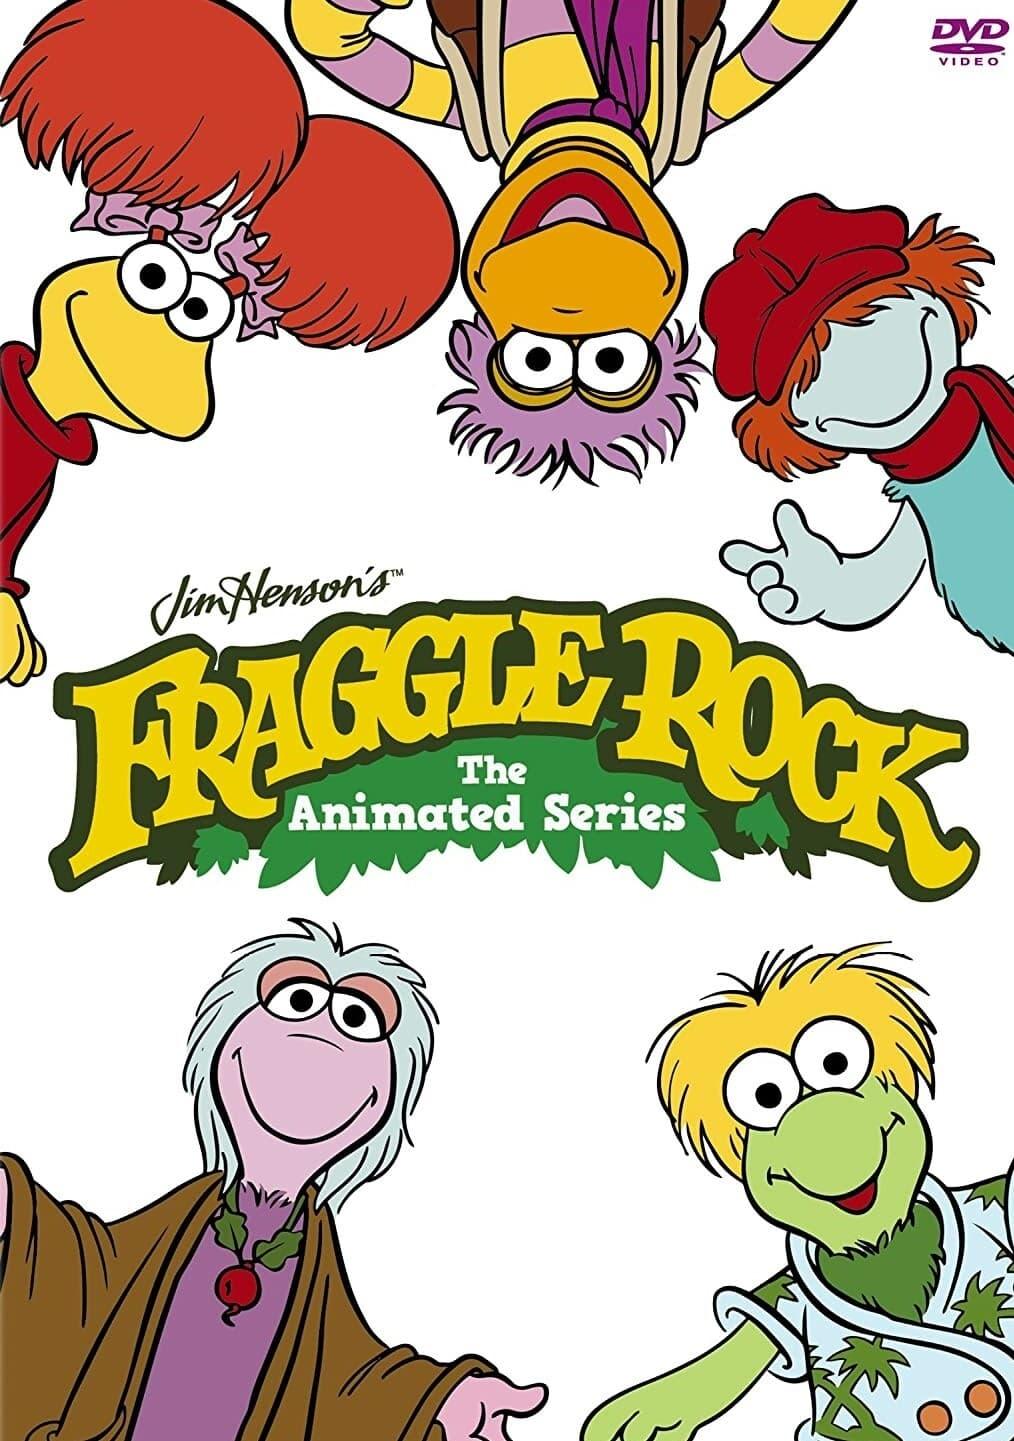 Fraggle Rock: The Animated Series poster